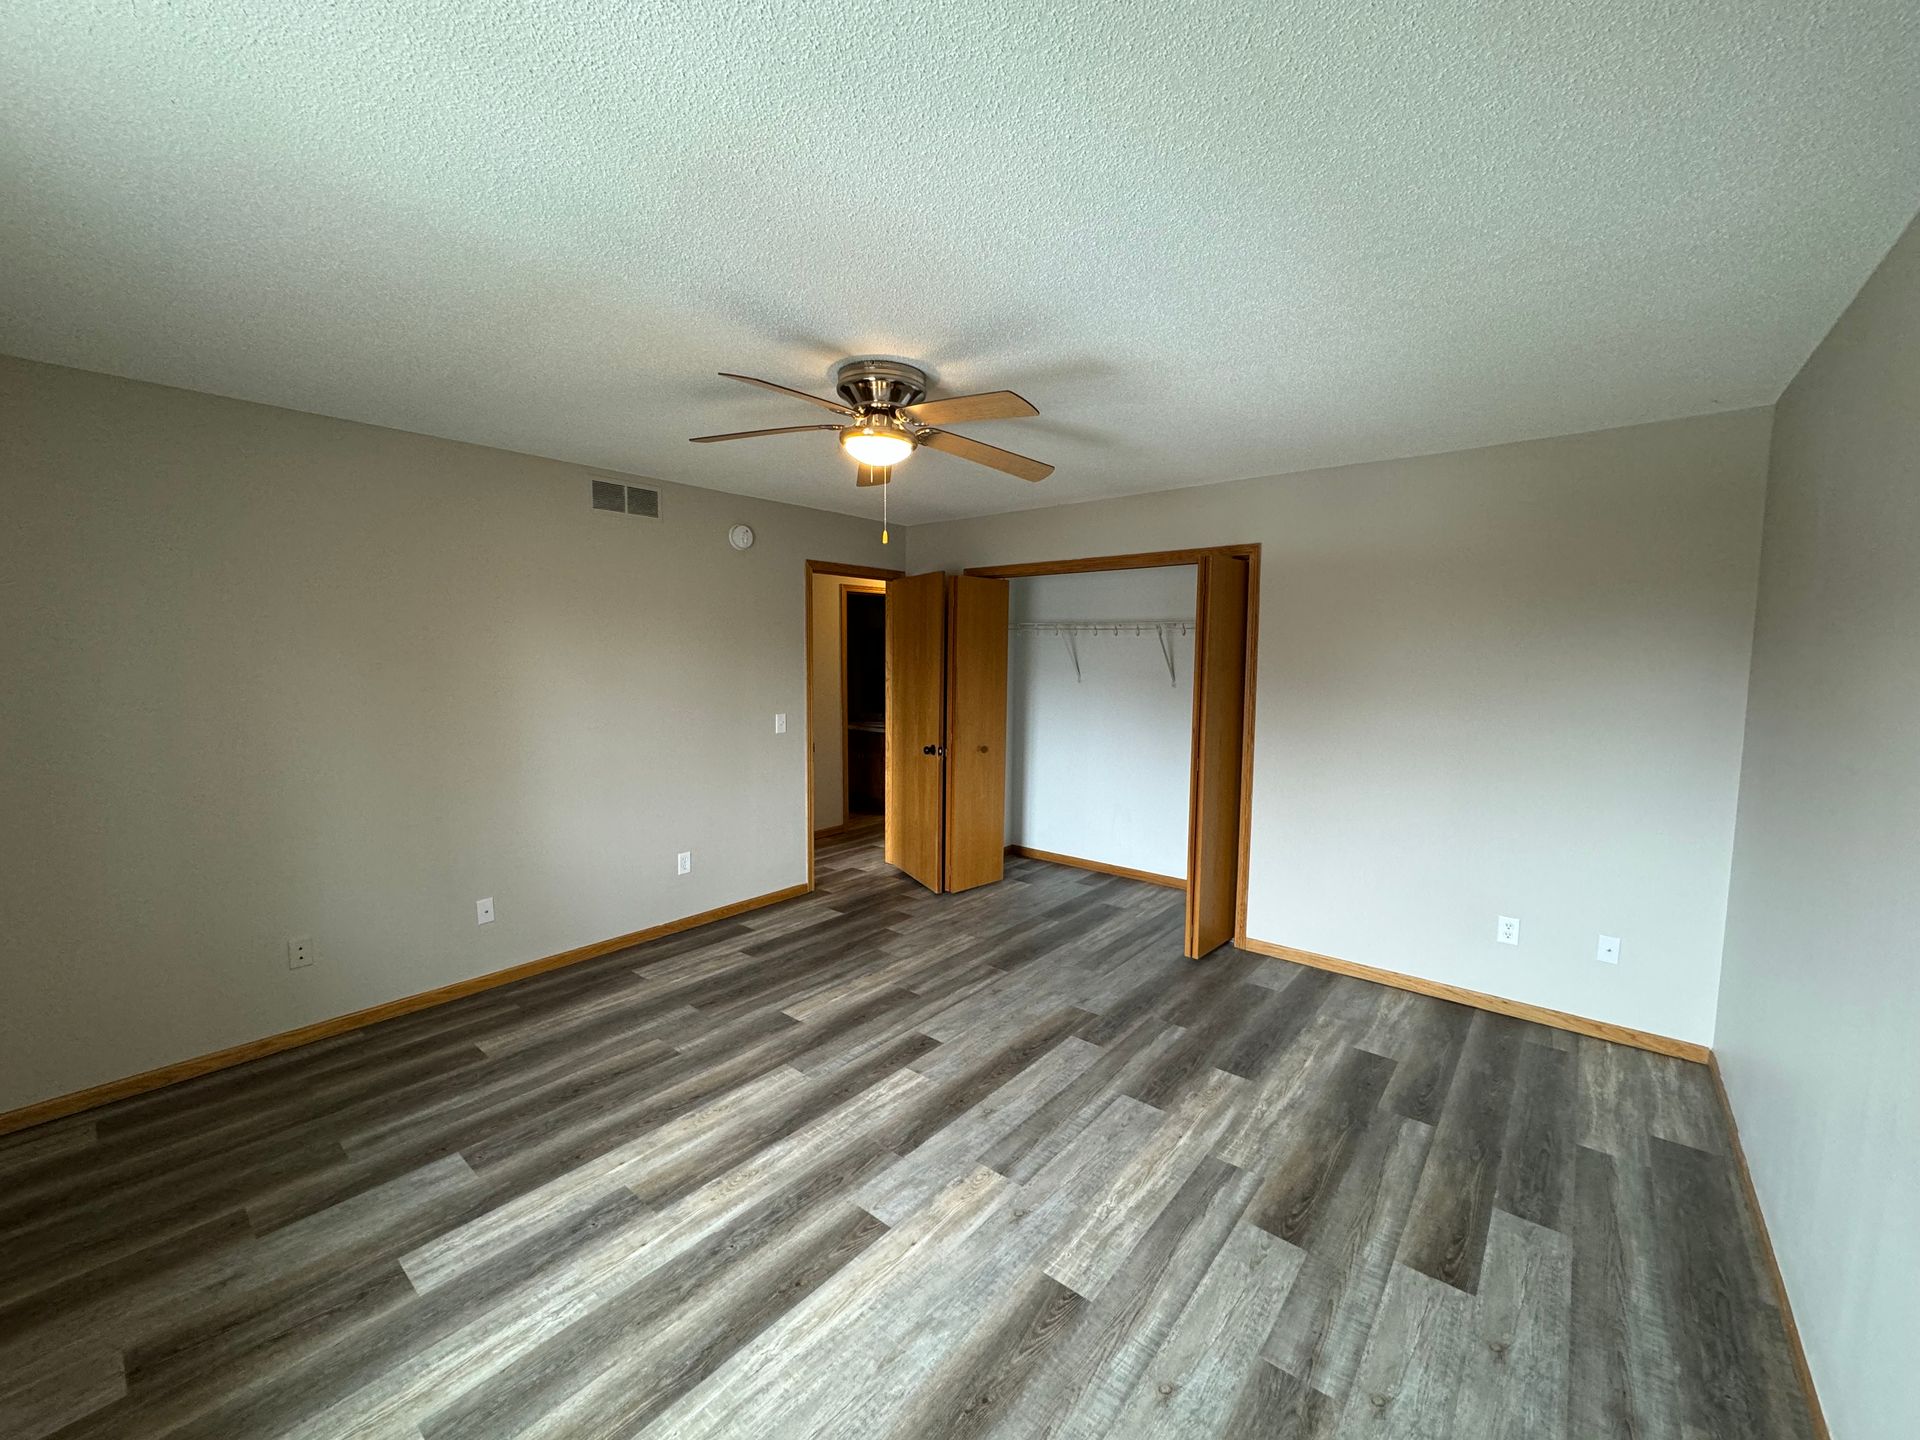 An empty bedroom with hardwood floors and a ceiling fan.